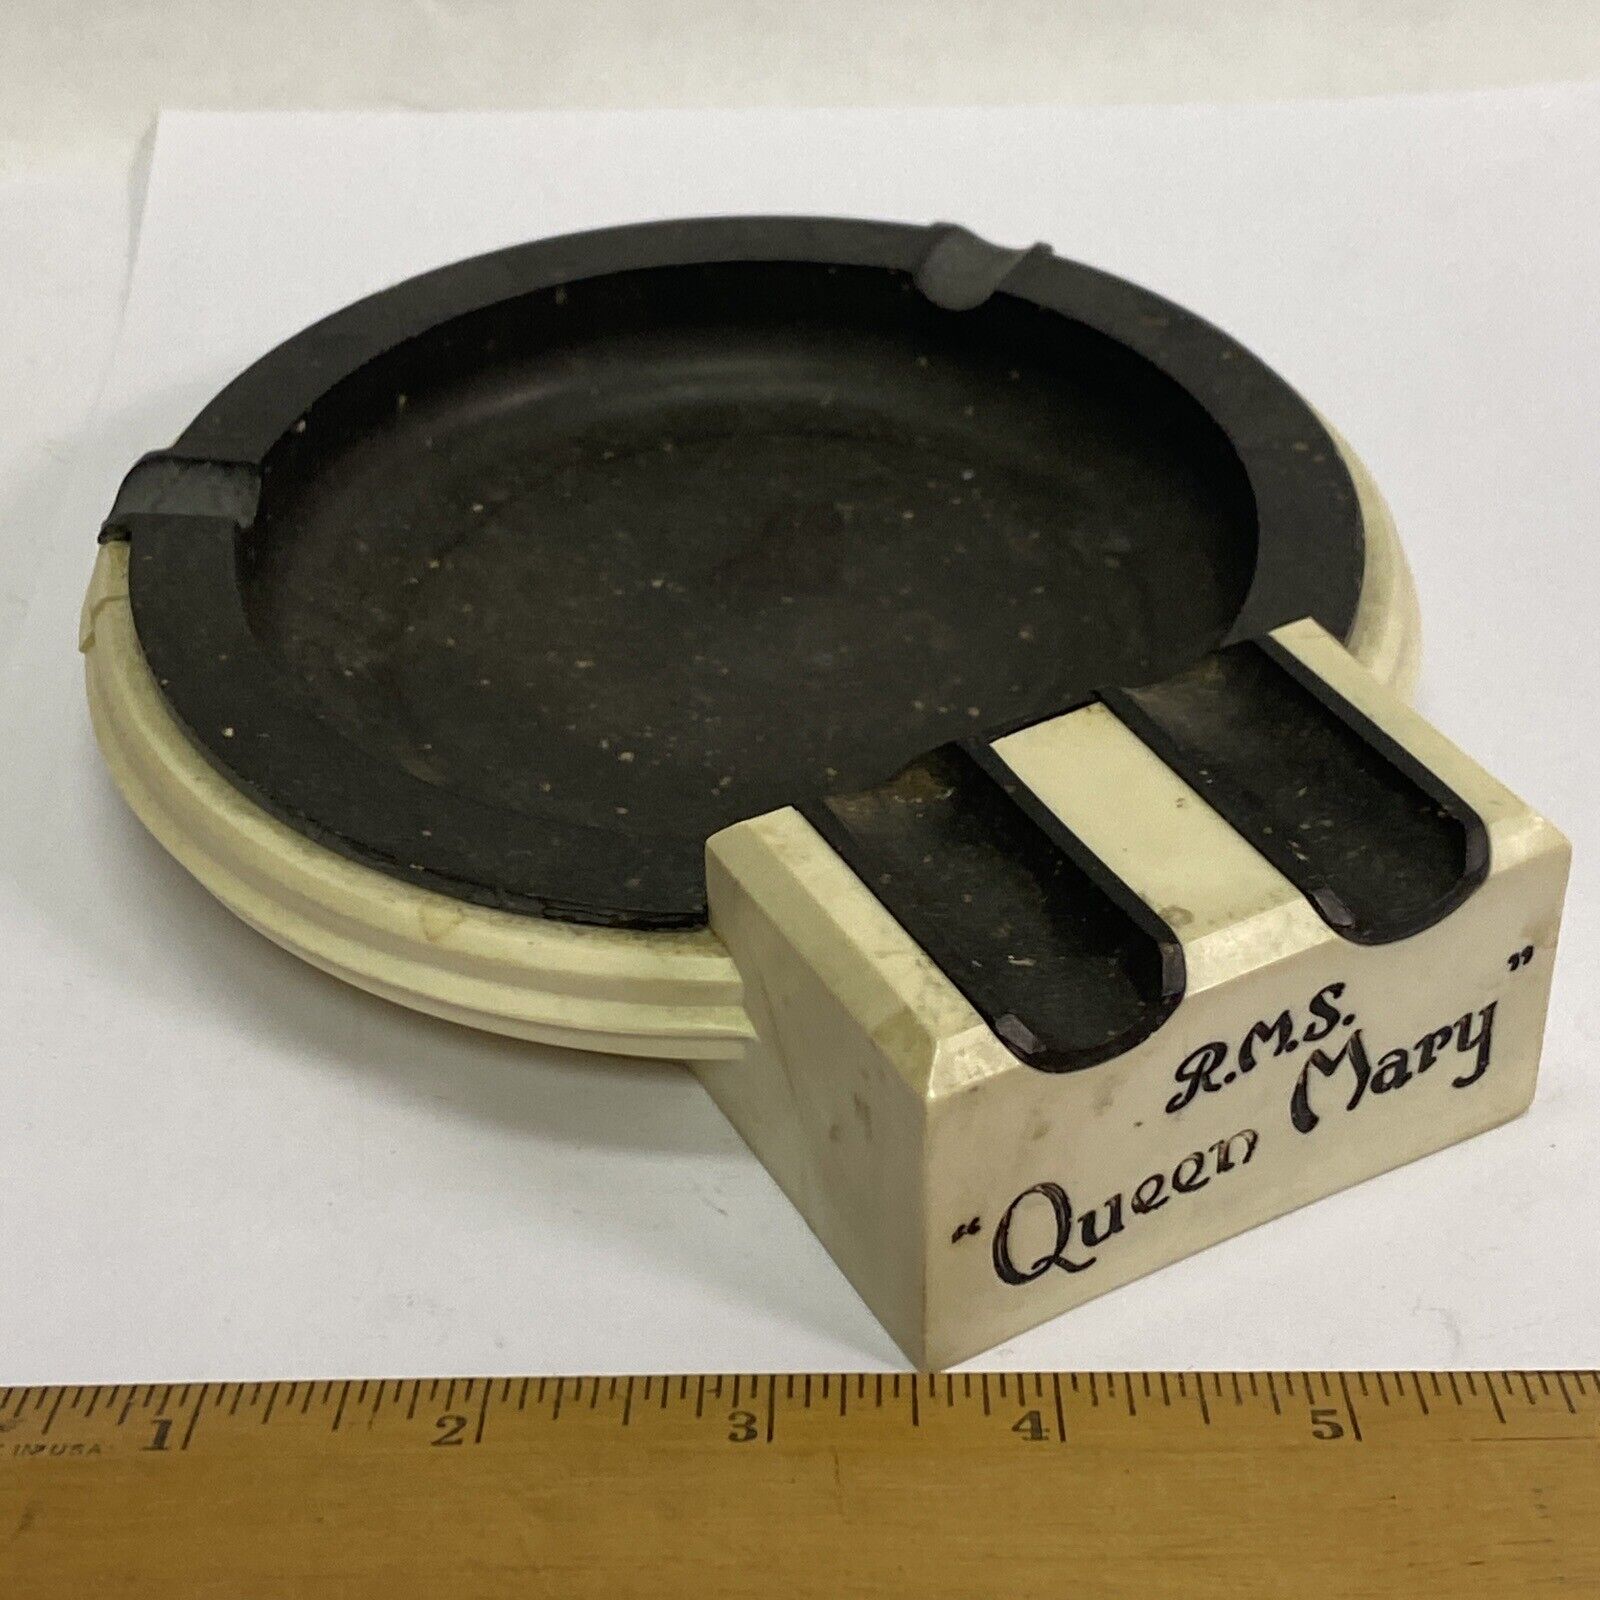 ORIG VINTAGE CUNARD WHITE STAR OCEAN LINER RMS QUEEN MARY CABIN DECK ASHTRAY 